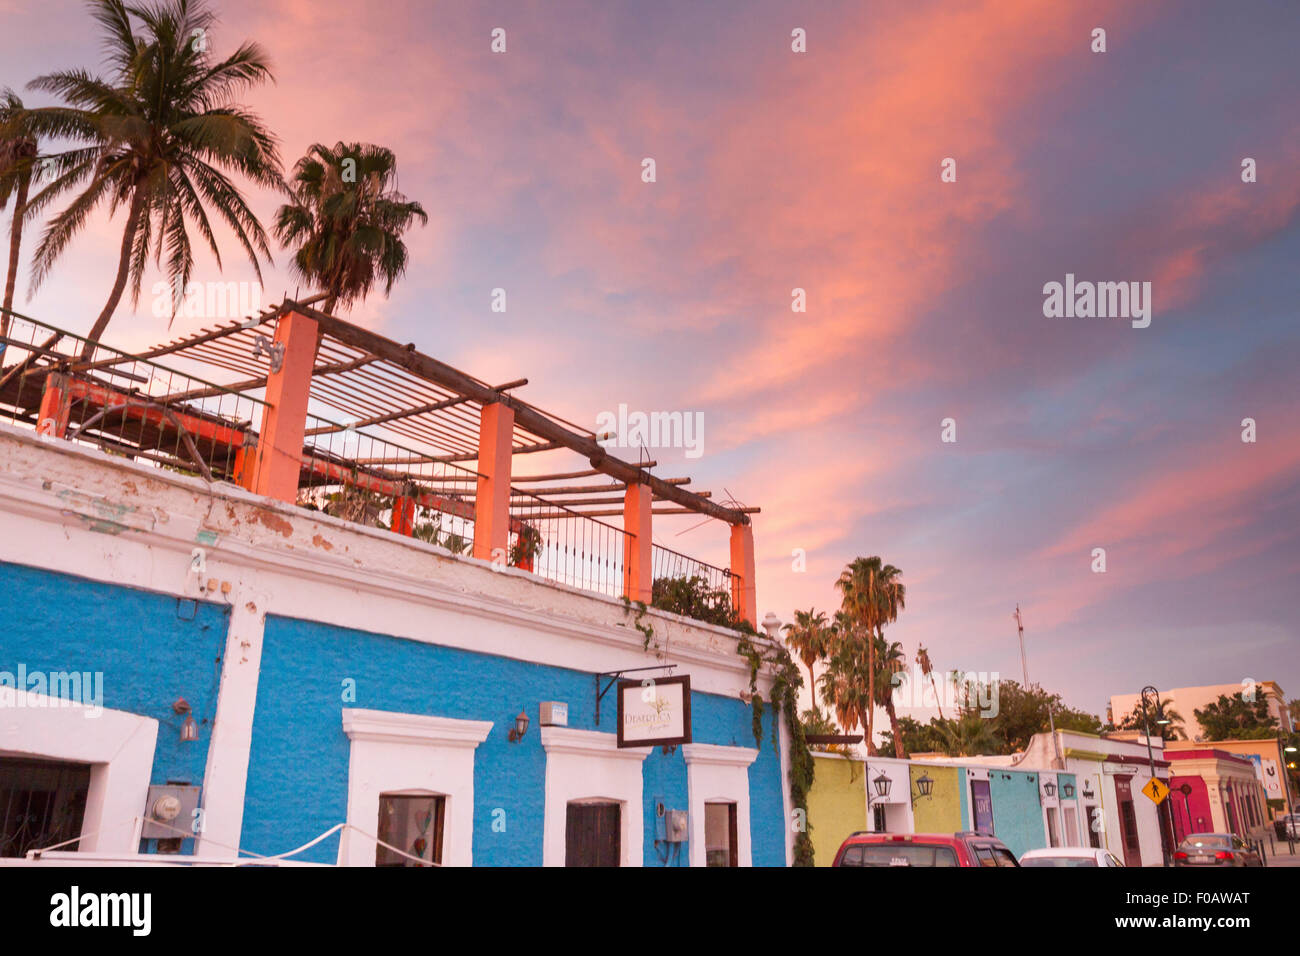 Coloured houses in a stunning golden hours time at the beach. San Jose del Cabo, Baja California Sur. Mexico Stock Photo